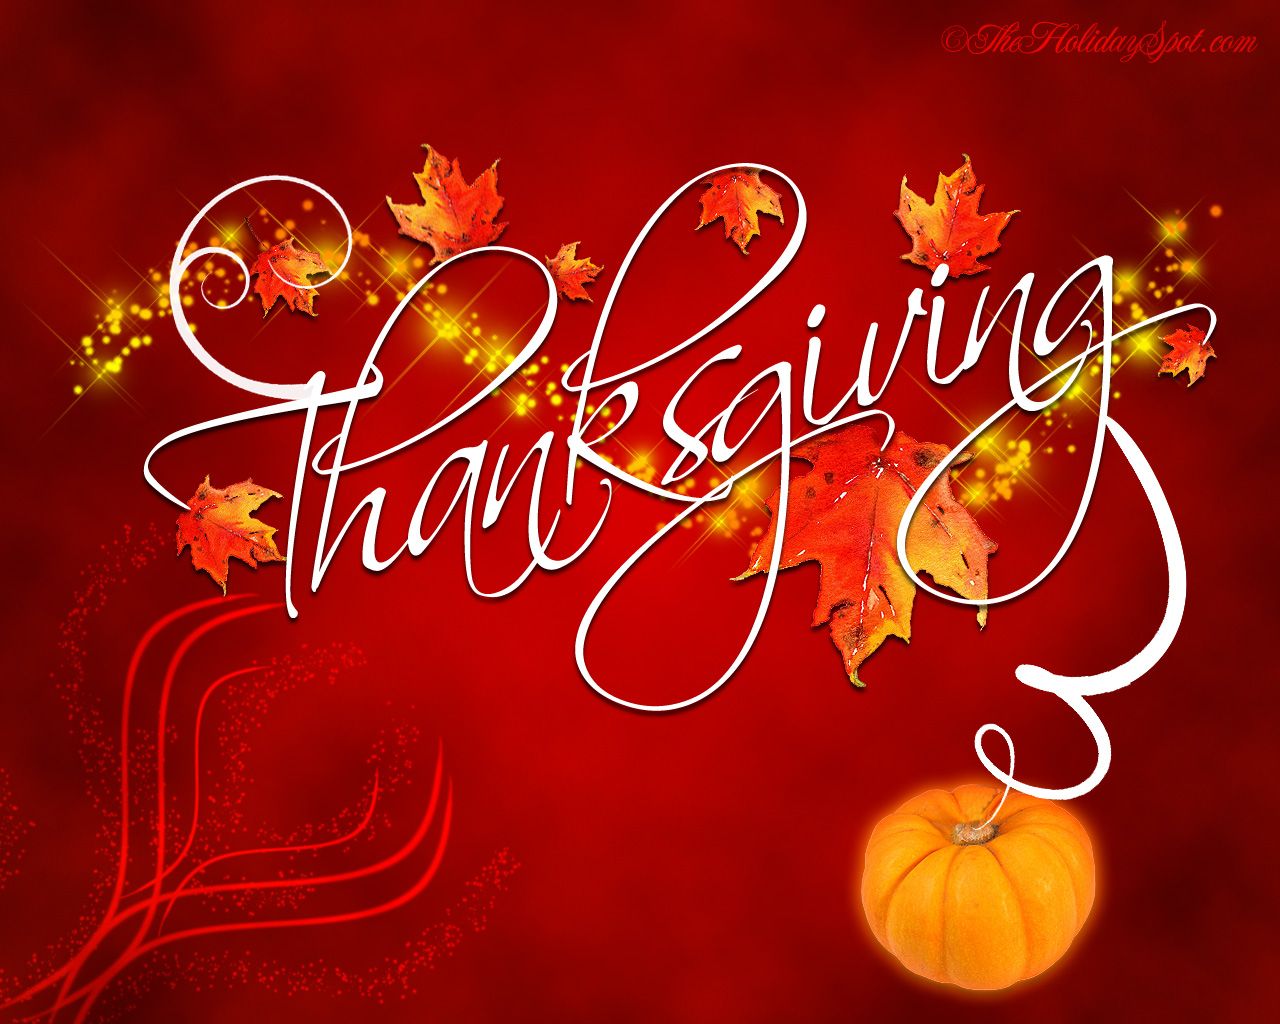 25 Happy Thanksgiving Day 2012 HD Backgrounds